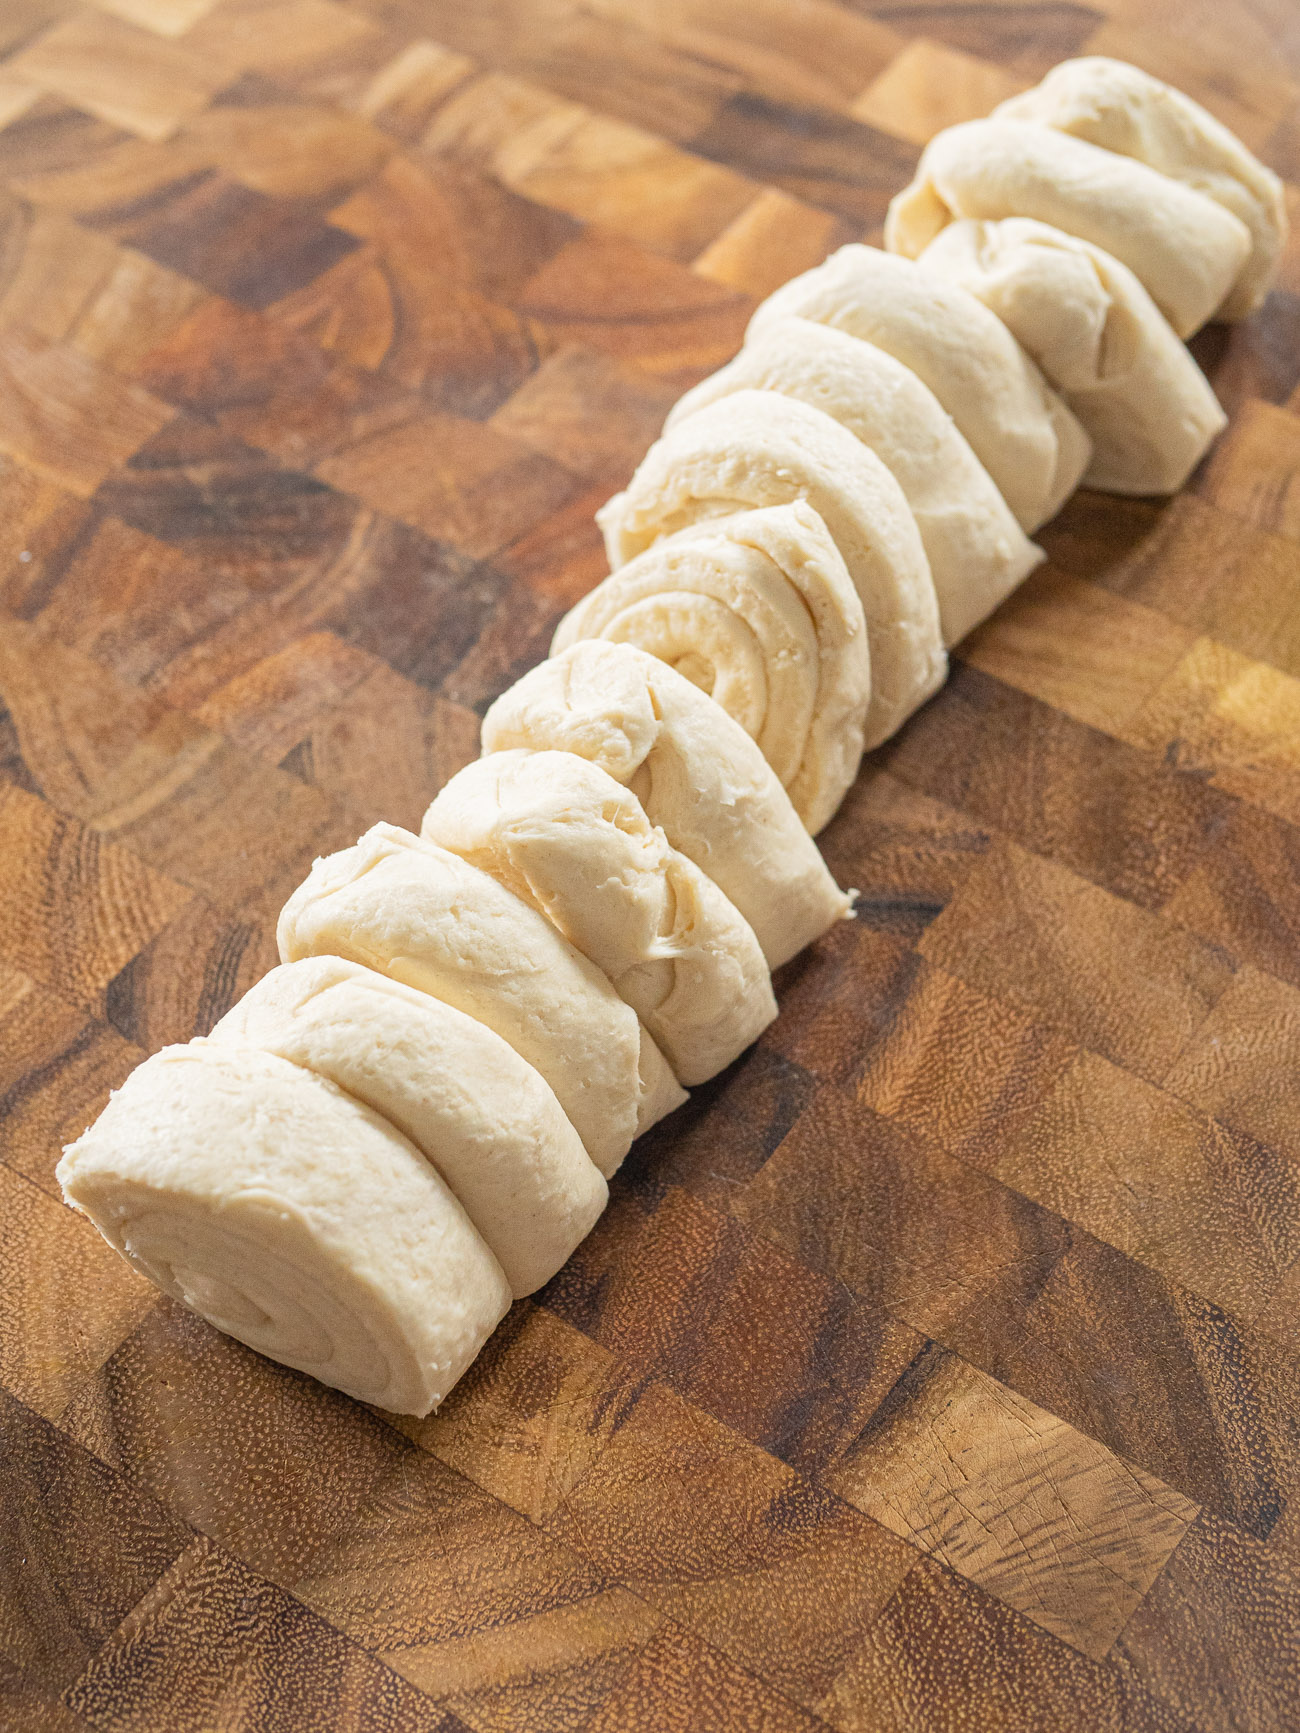 Remove crescent roll dough from package but do not unroll. Cut roll of dough into 12 equal slices.